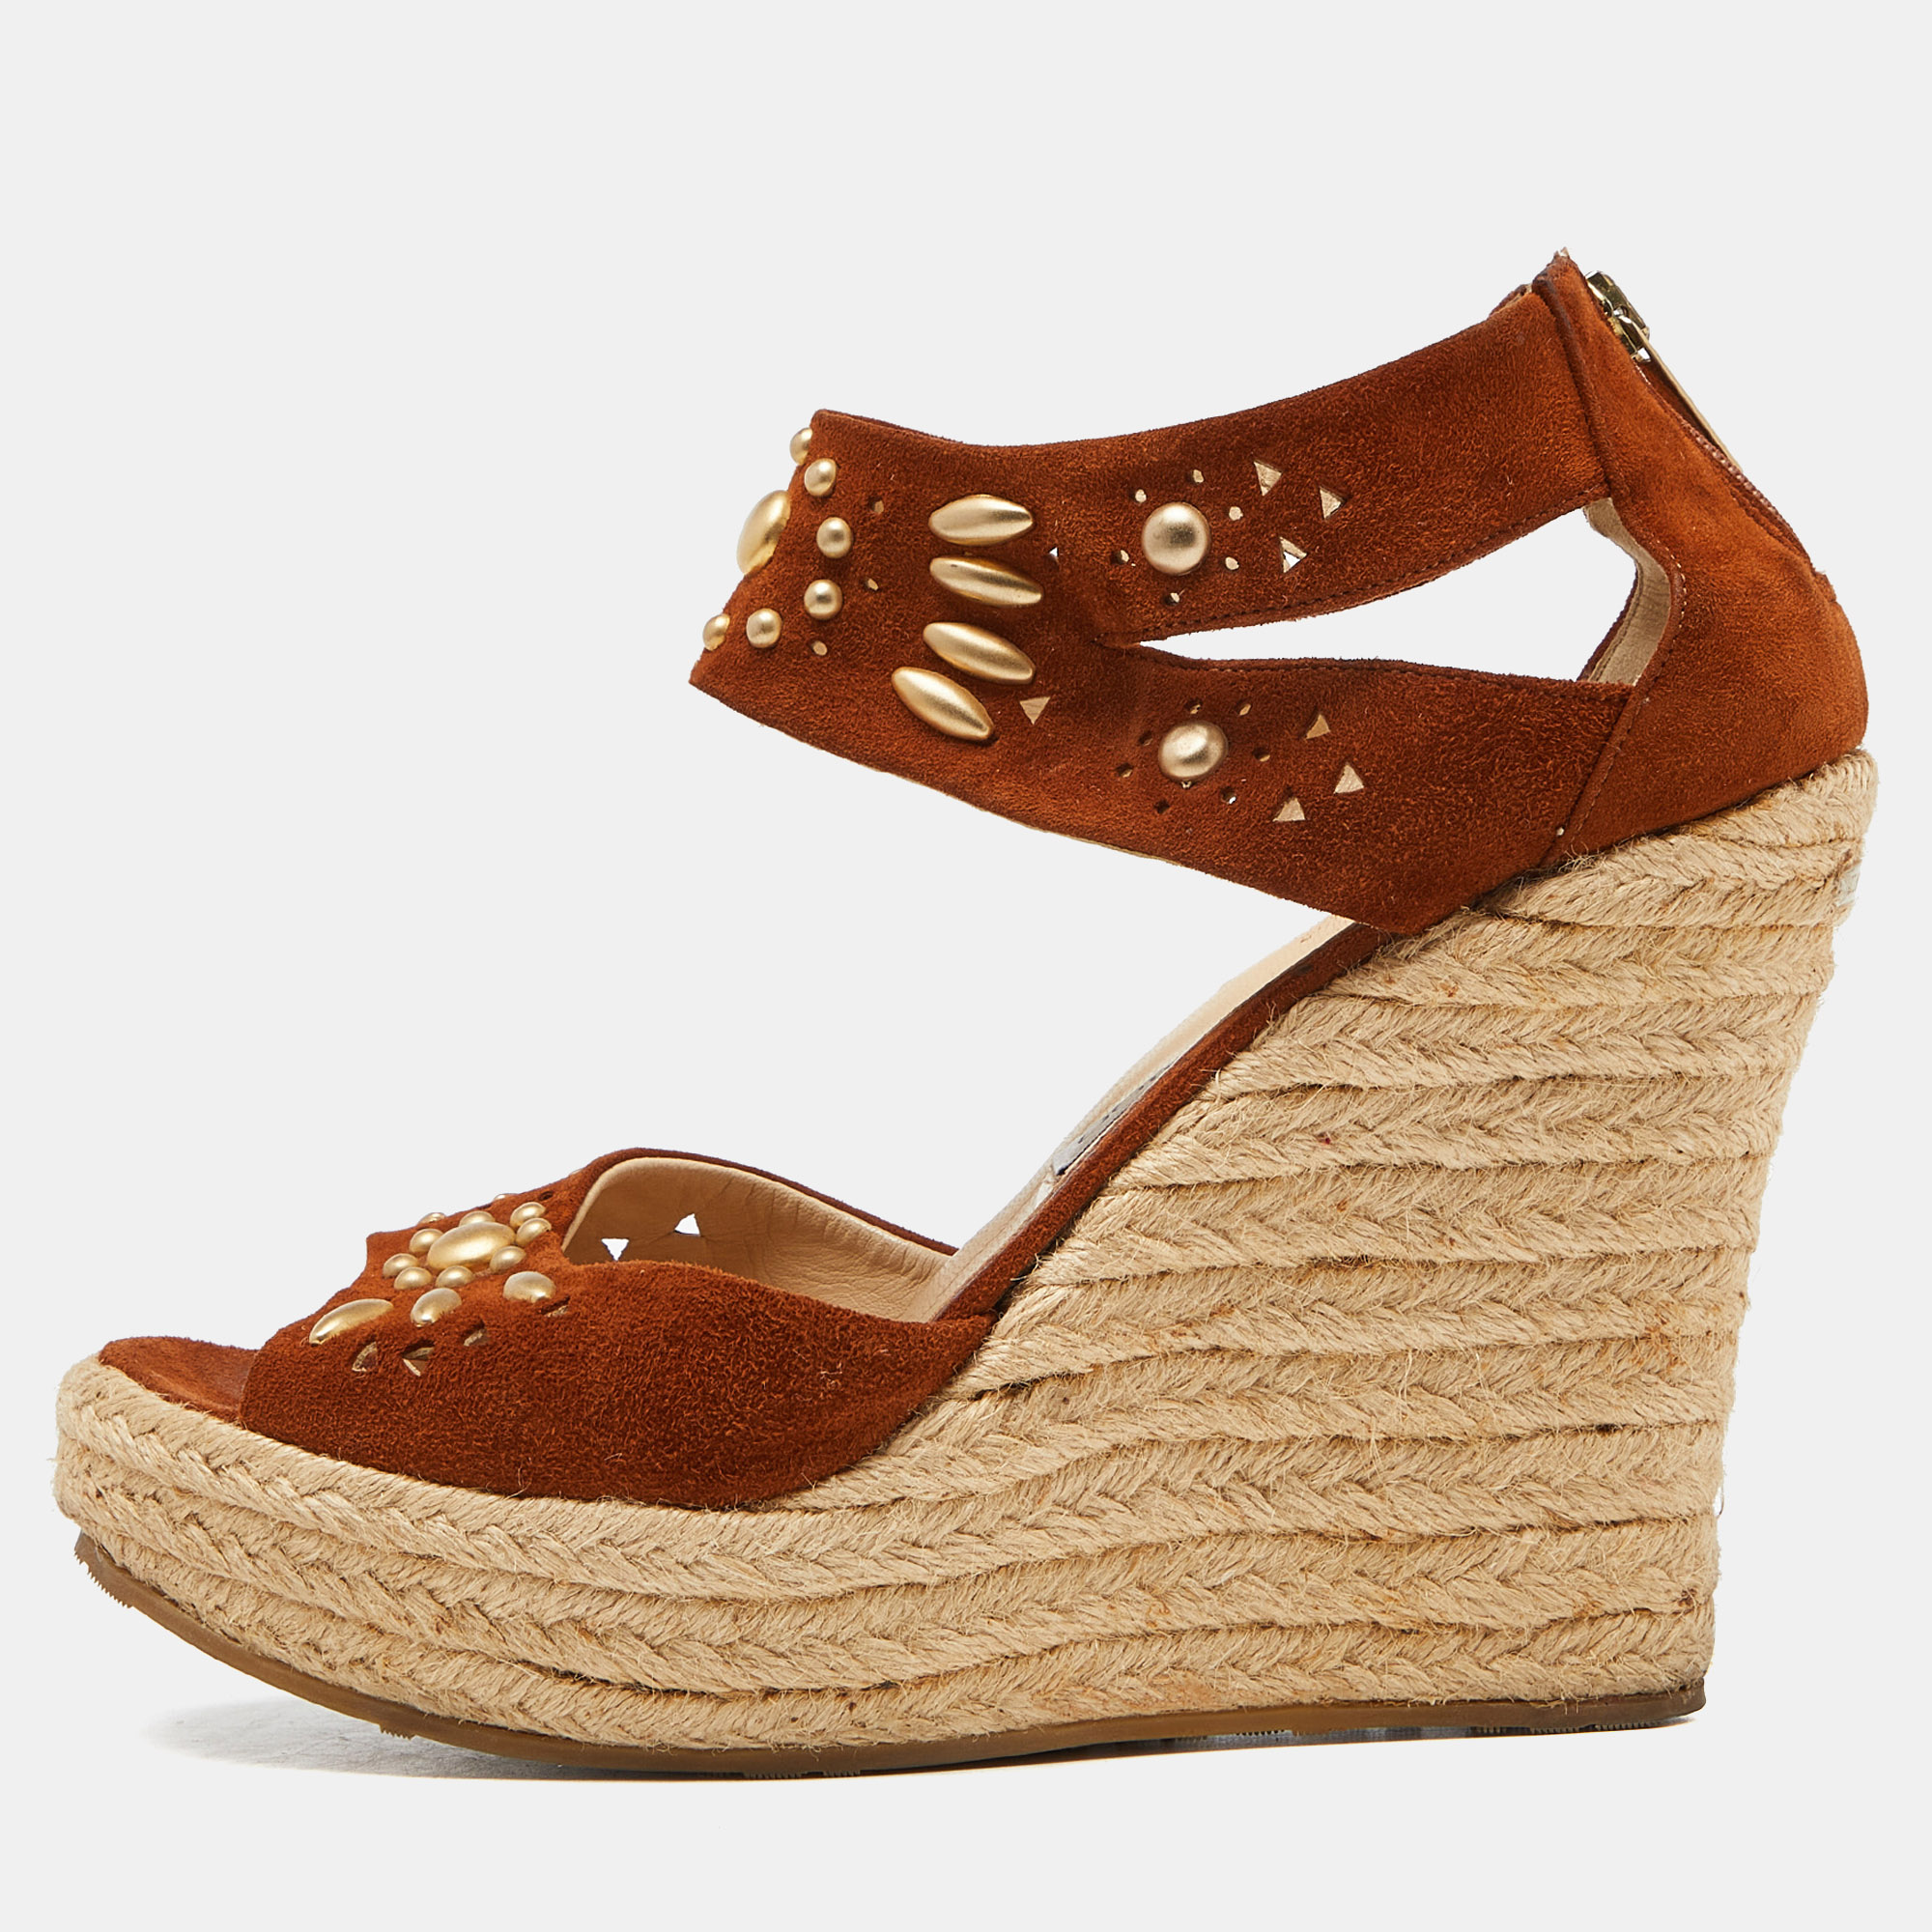 Pre-owned Jimmy Choo Brown Suede Wedge Sandals Size 40.5